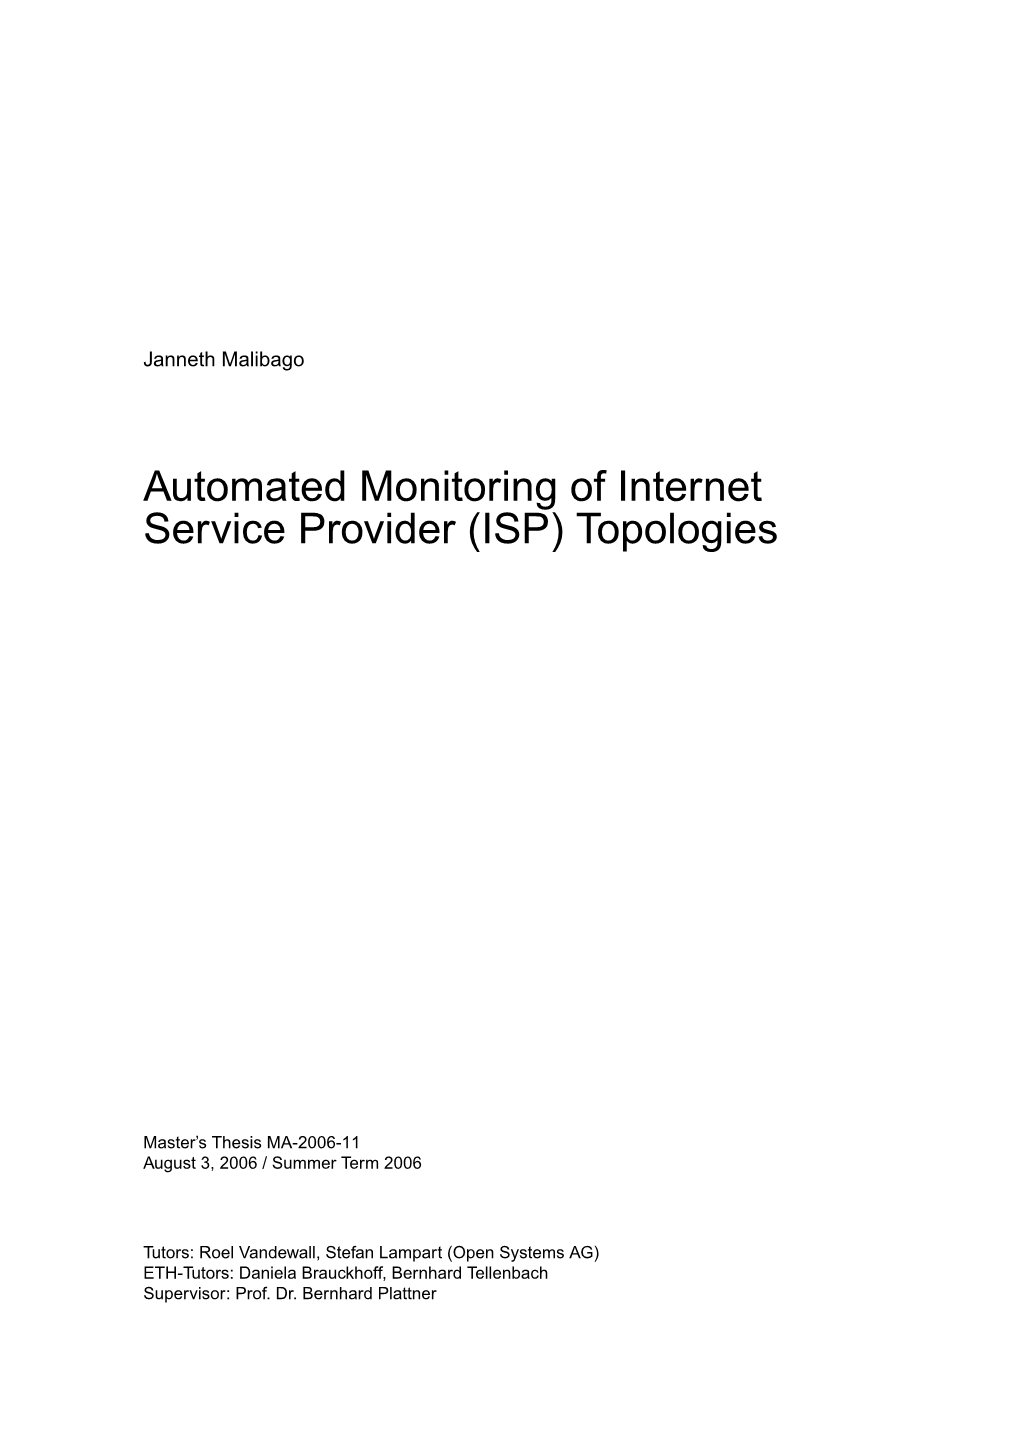 Automated Monitoring of Internet Service Provider (ISP) Topologies